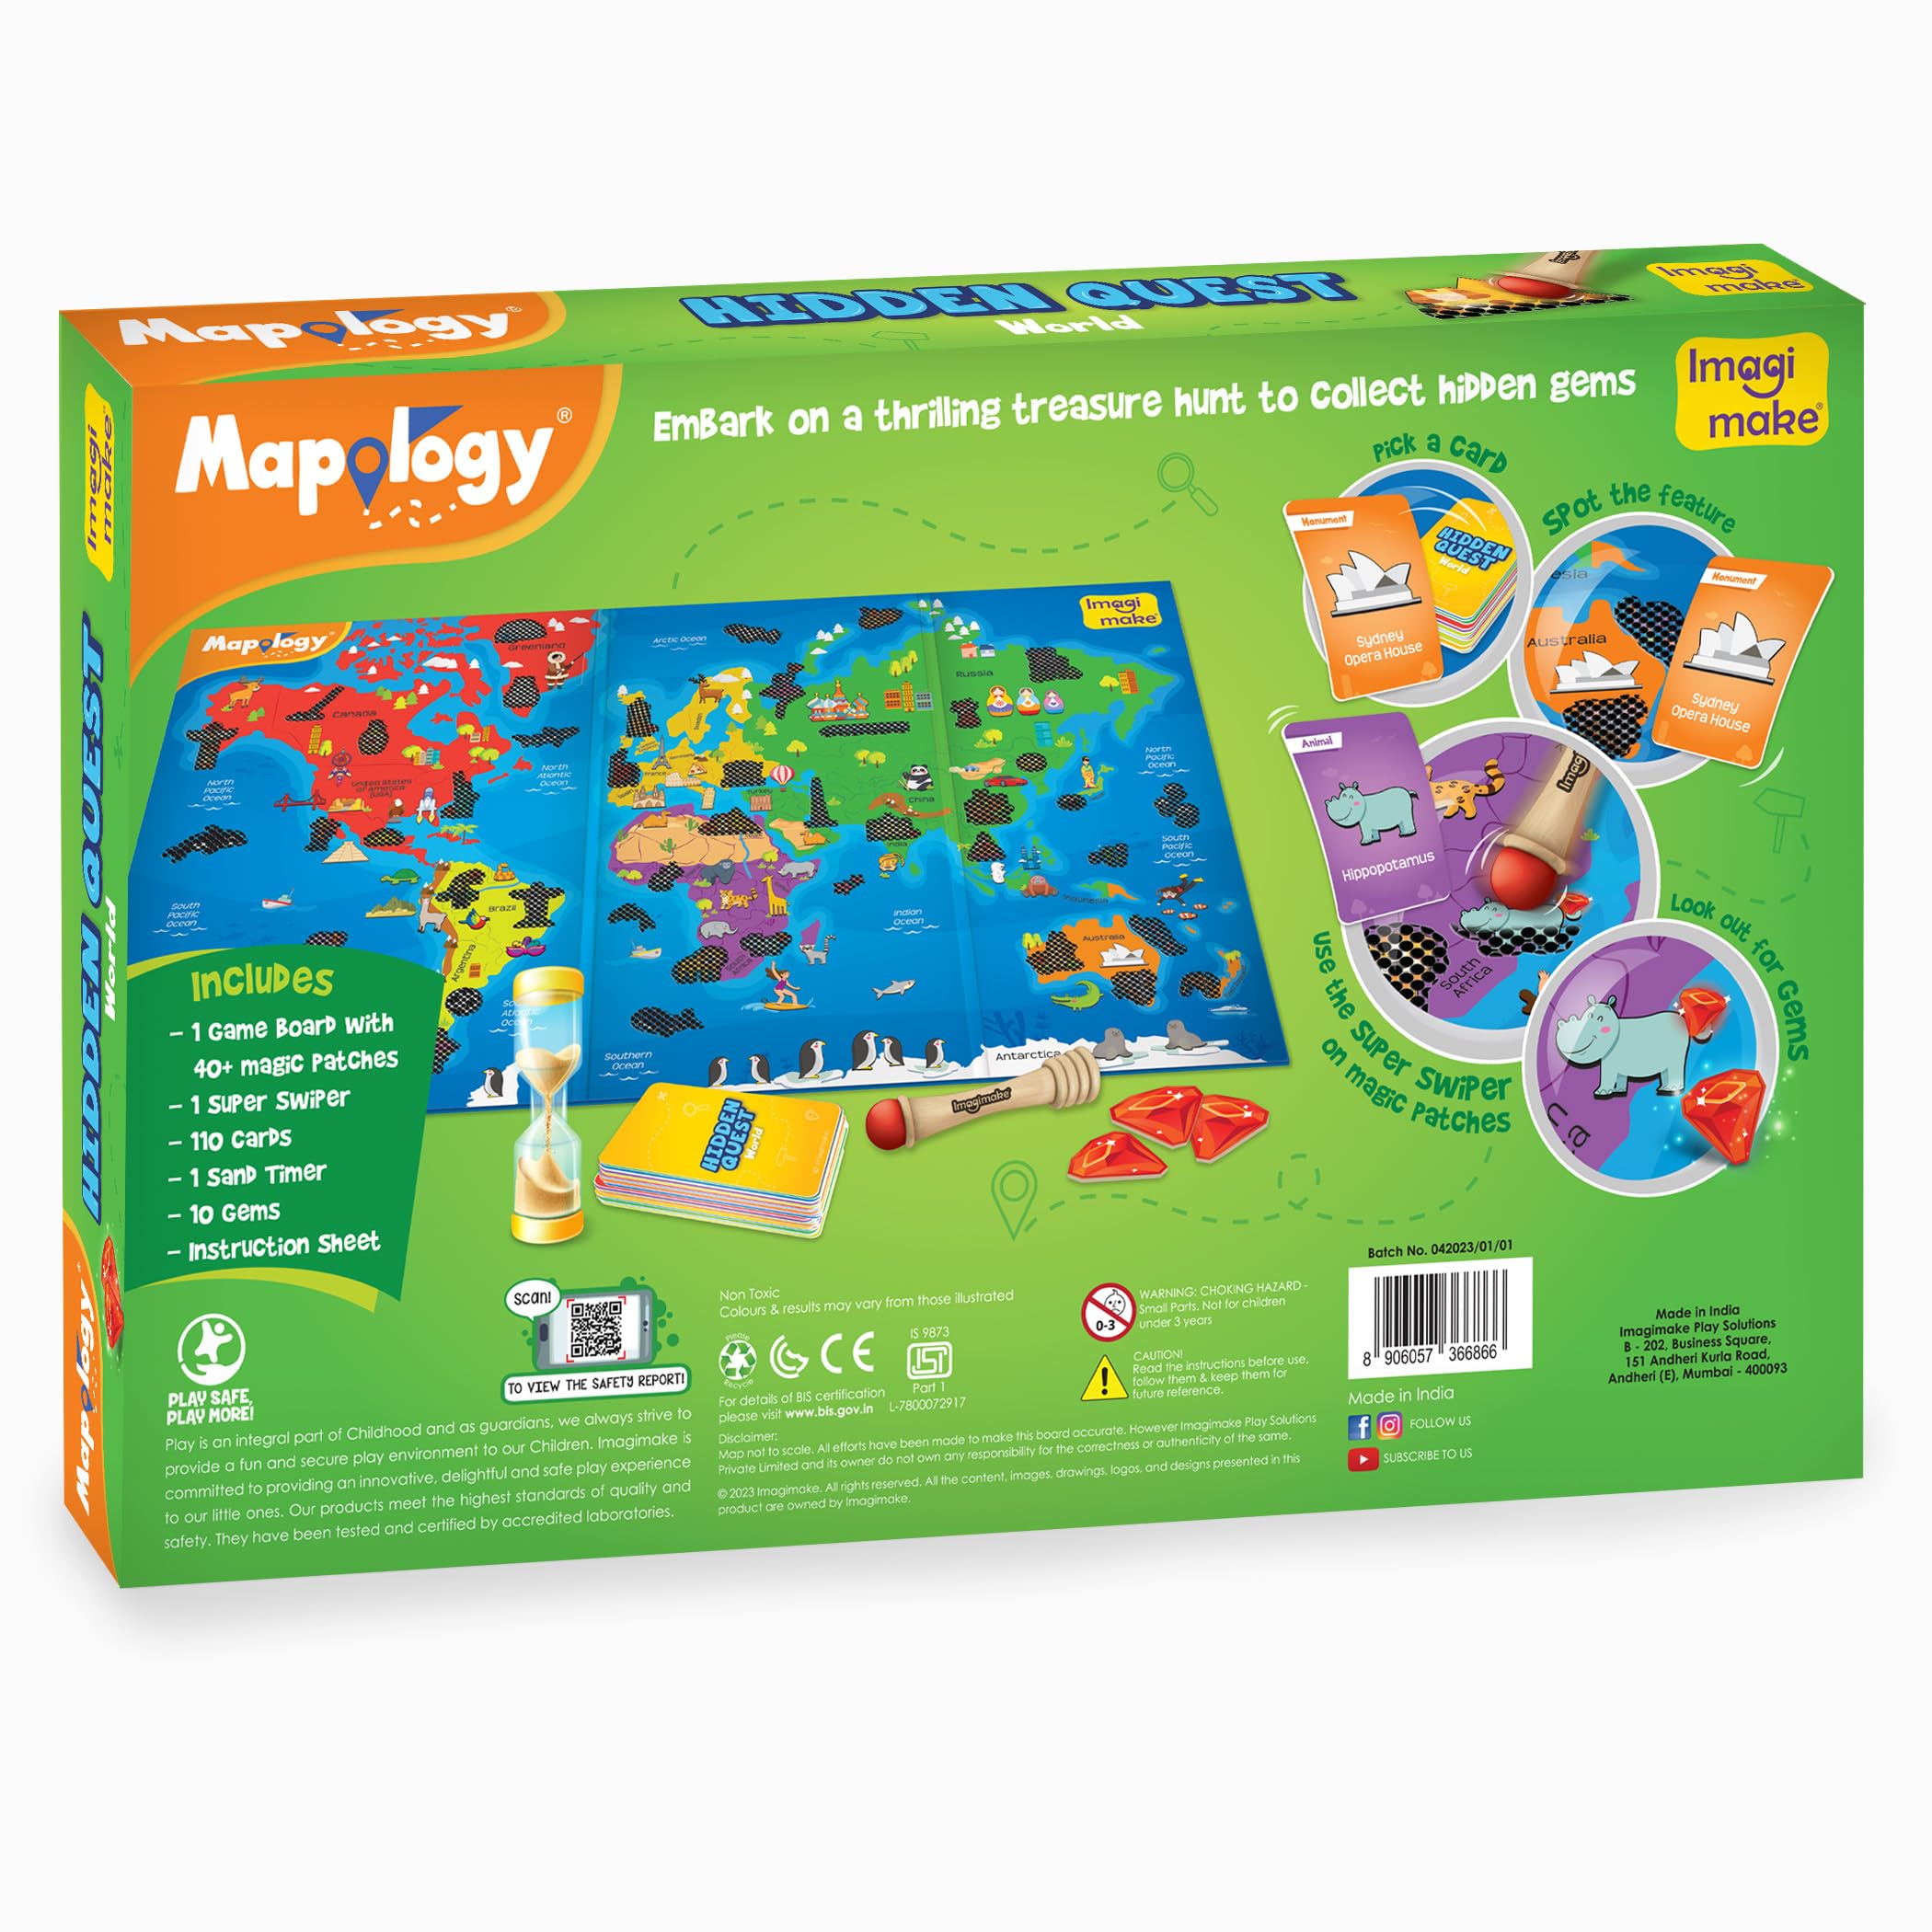 Imagimake Mapology Hidden Quest World Map Board Games for Kids | Magical Swipe & Reveal | Educational Toys for Kids 5 Years | Kids Toys for Boys & Girls | Card Games | Birthday Gift for Girls & Boys